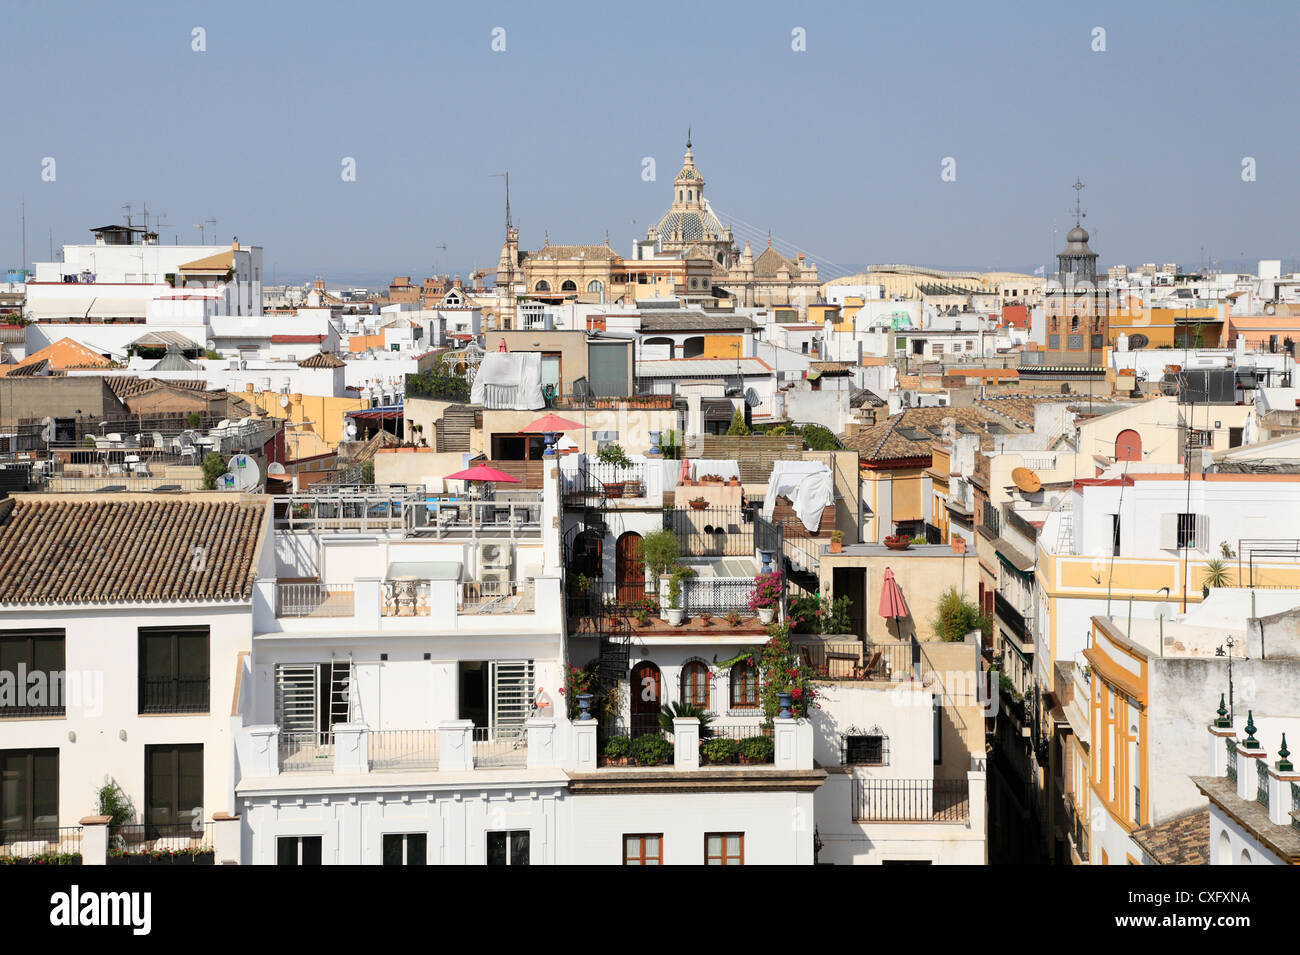 Aerial view of the rooftops of Seville Spain from the Giralda Tower Stock Photo